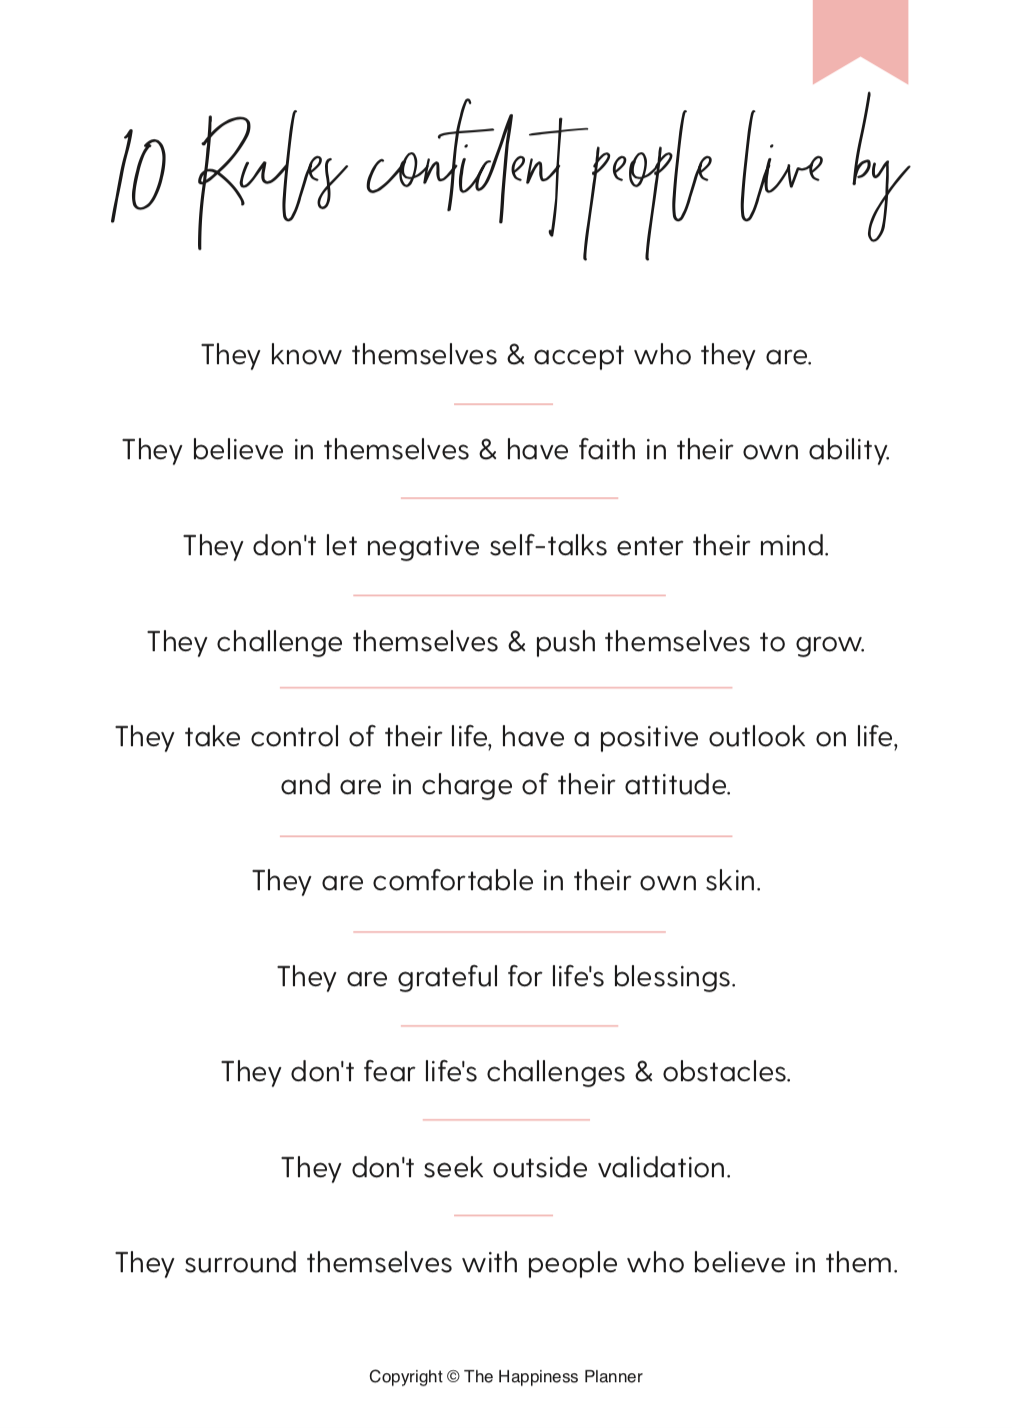 Printables: #Confidence - The Happiness Planner®